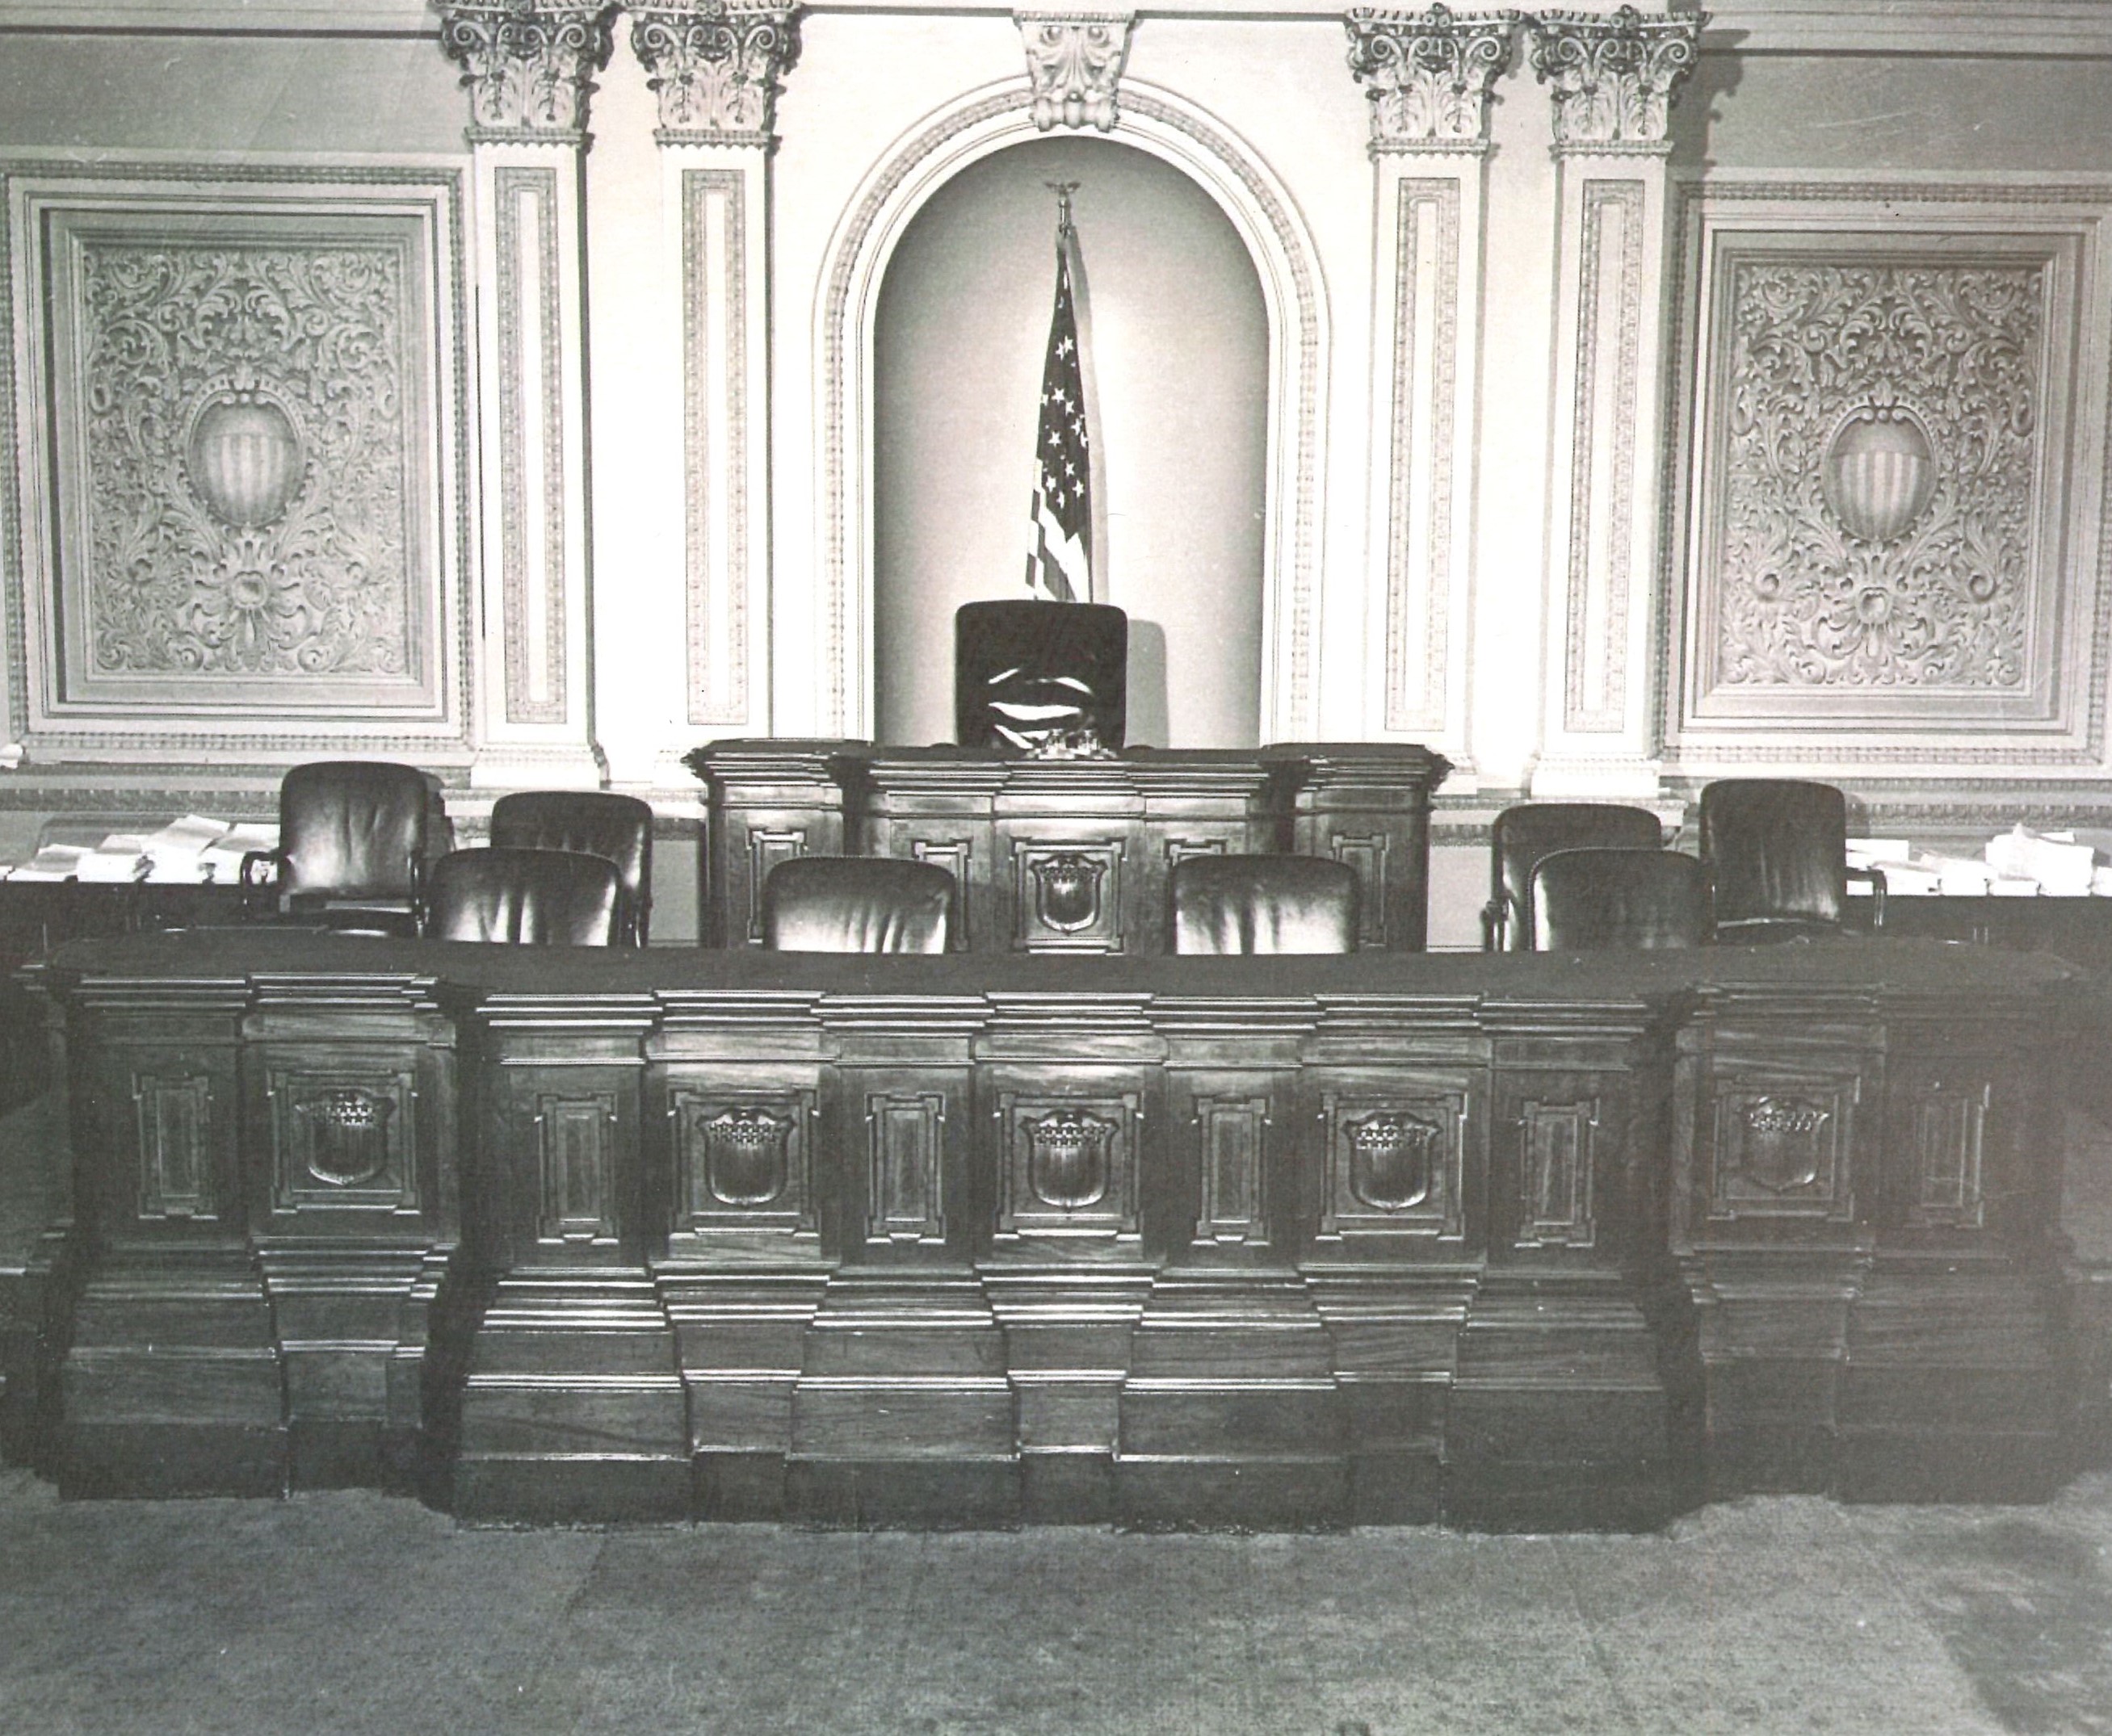 From D.C. to Kentucky:  The History of the U.S. Senate Clerk's Desk